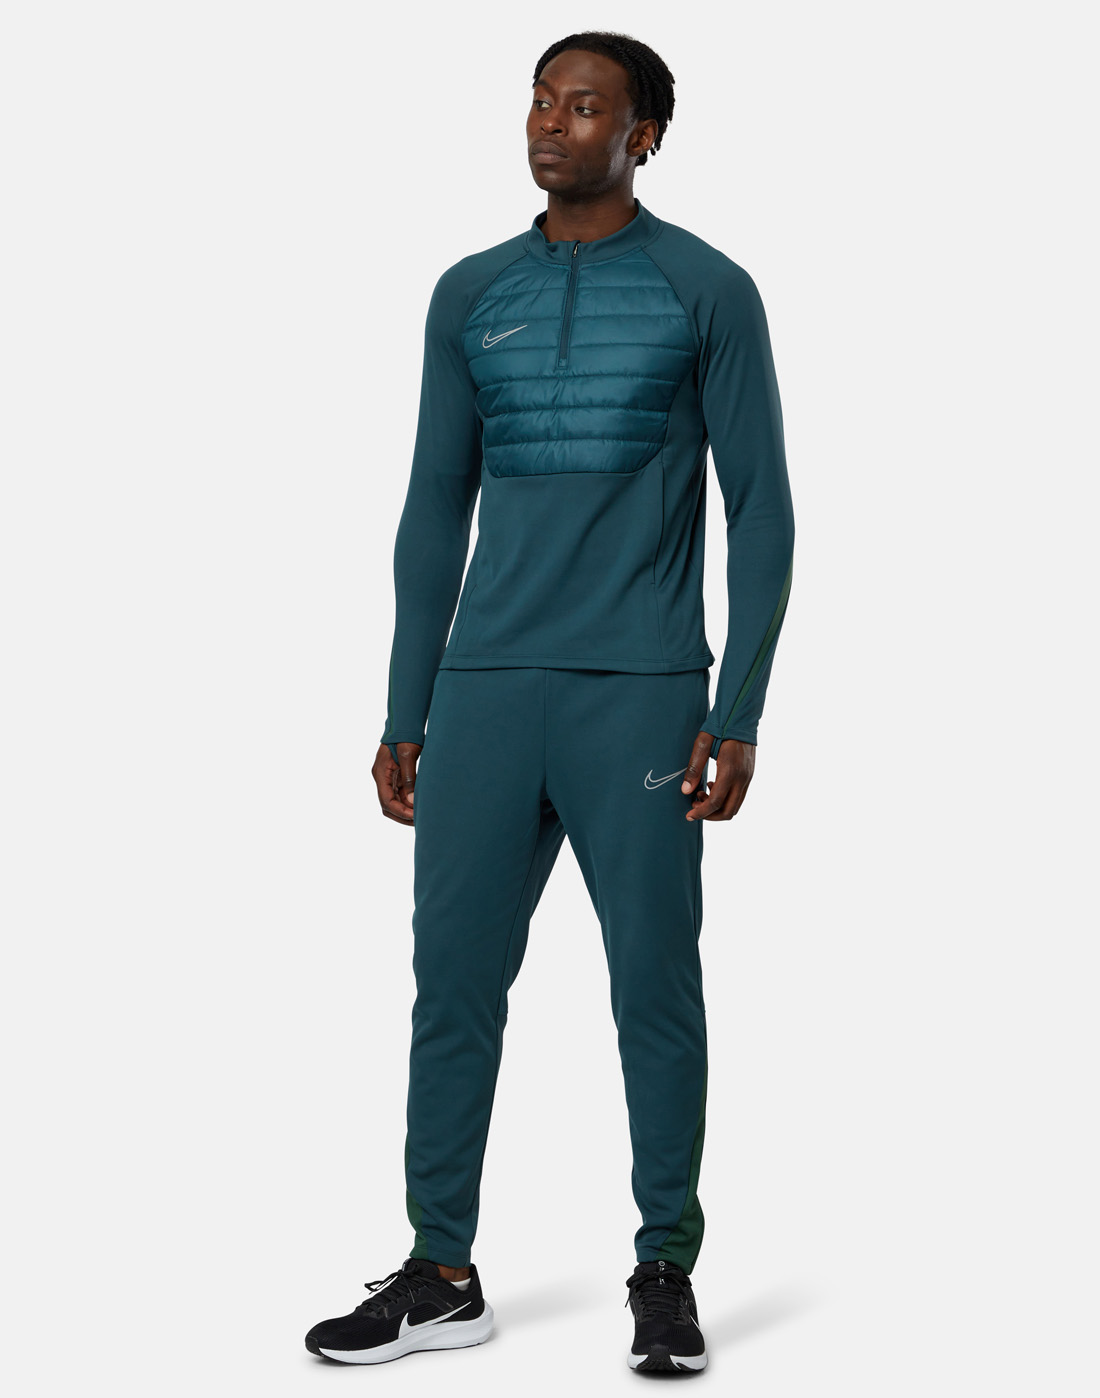 Nike Mens Winter Warrior Academy Drill Top - Green | Life Style Sports IE